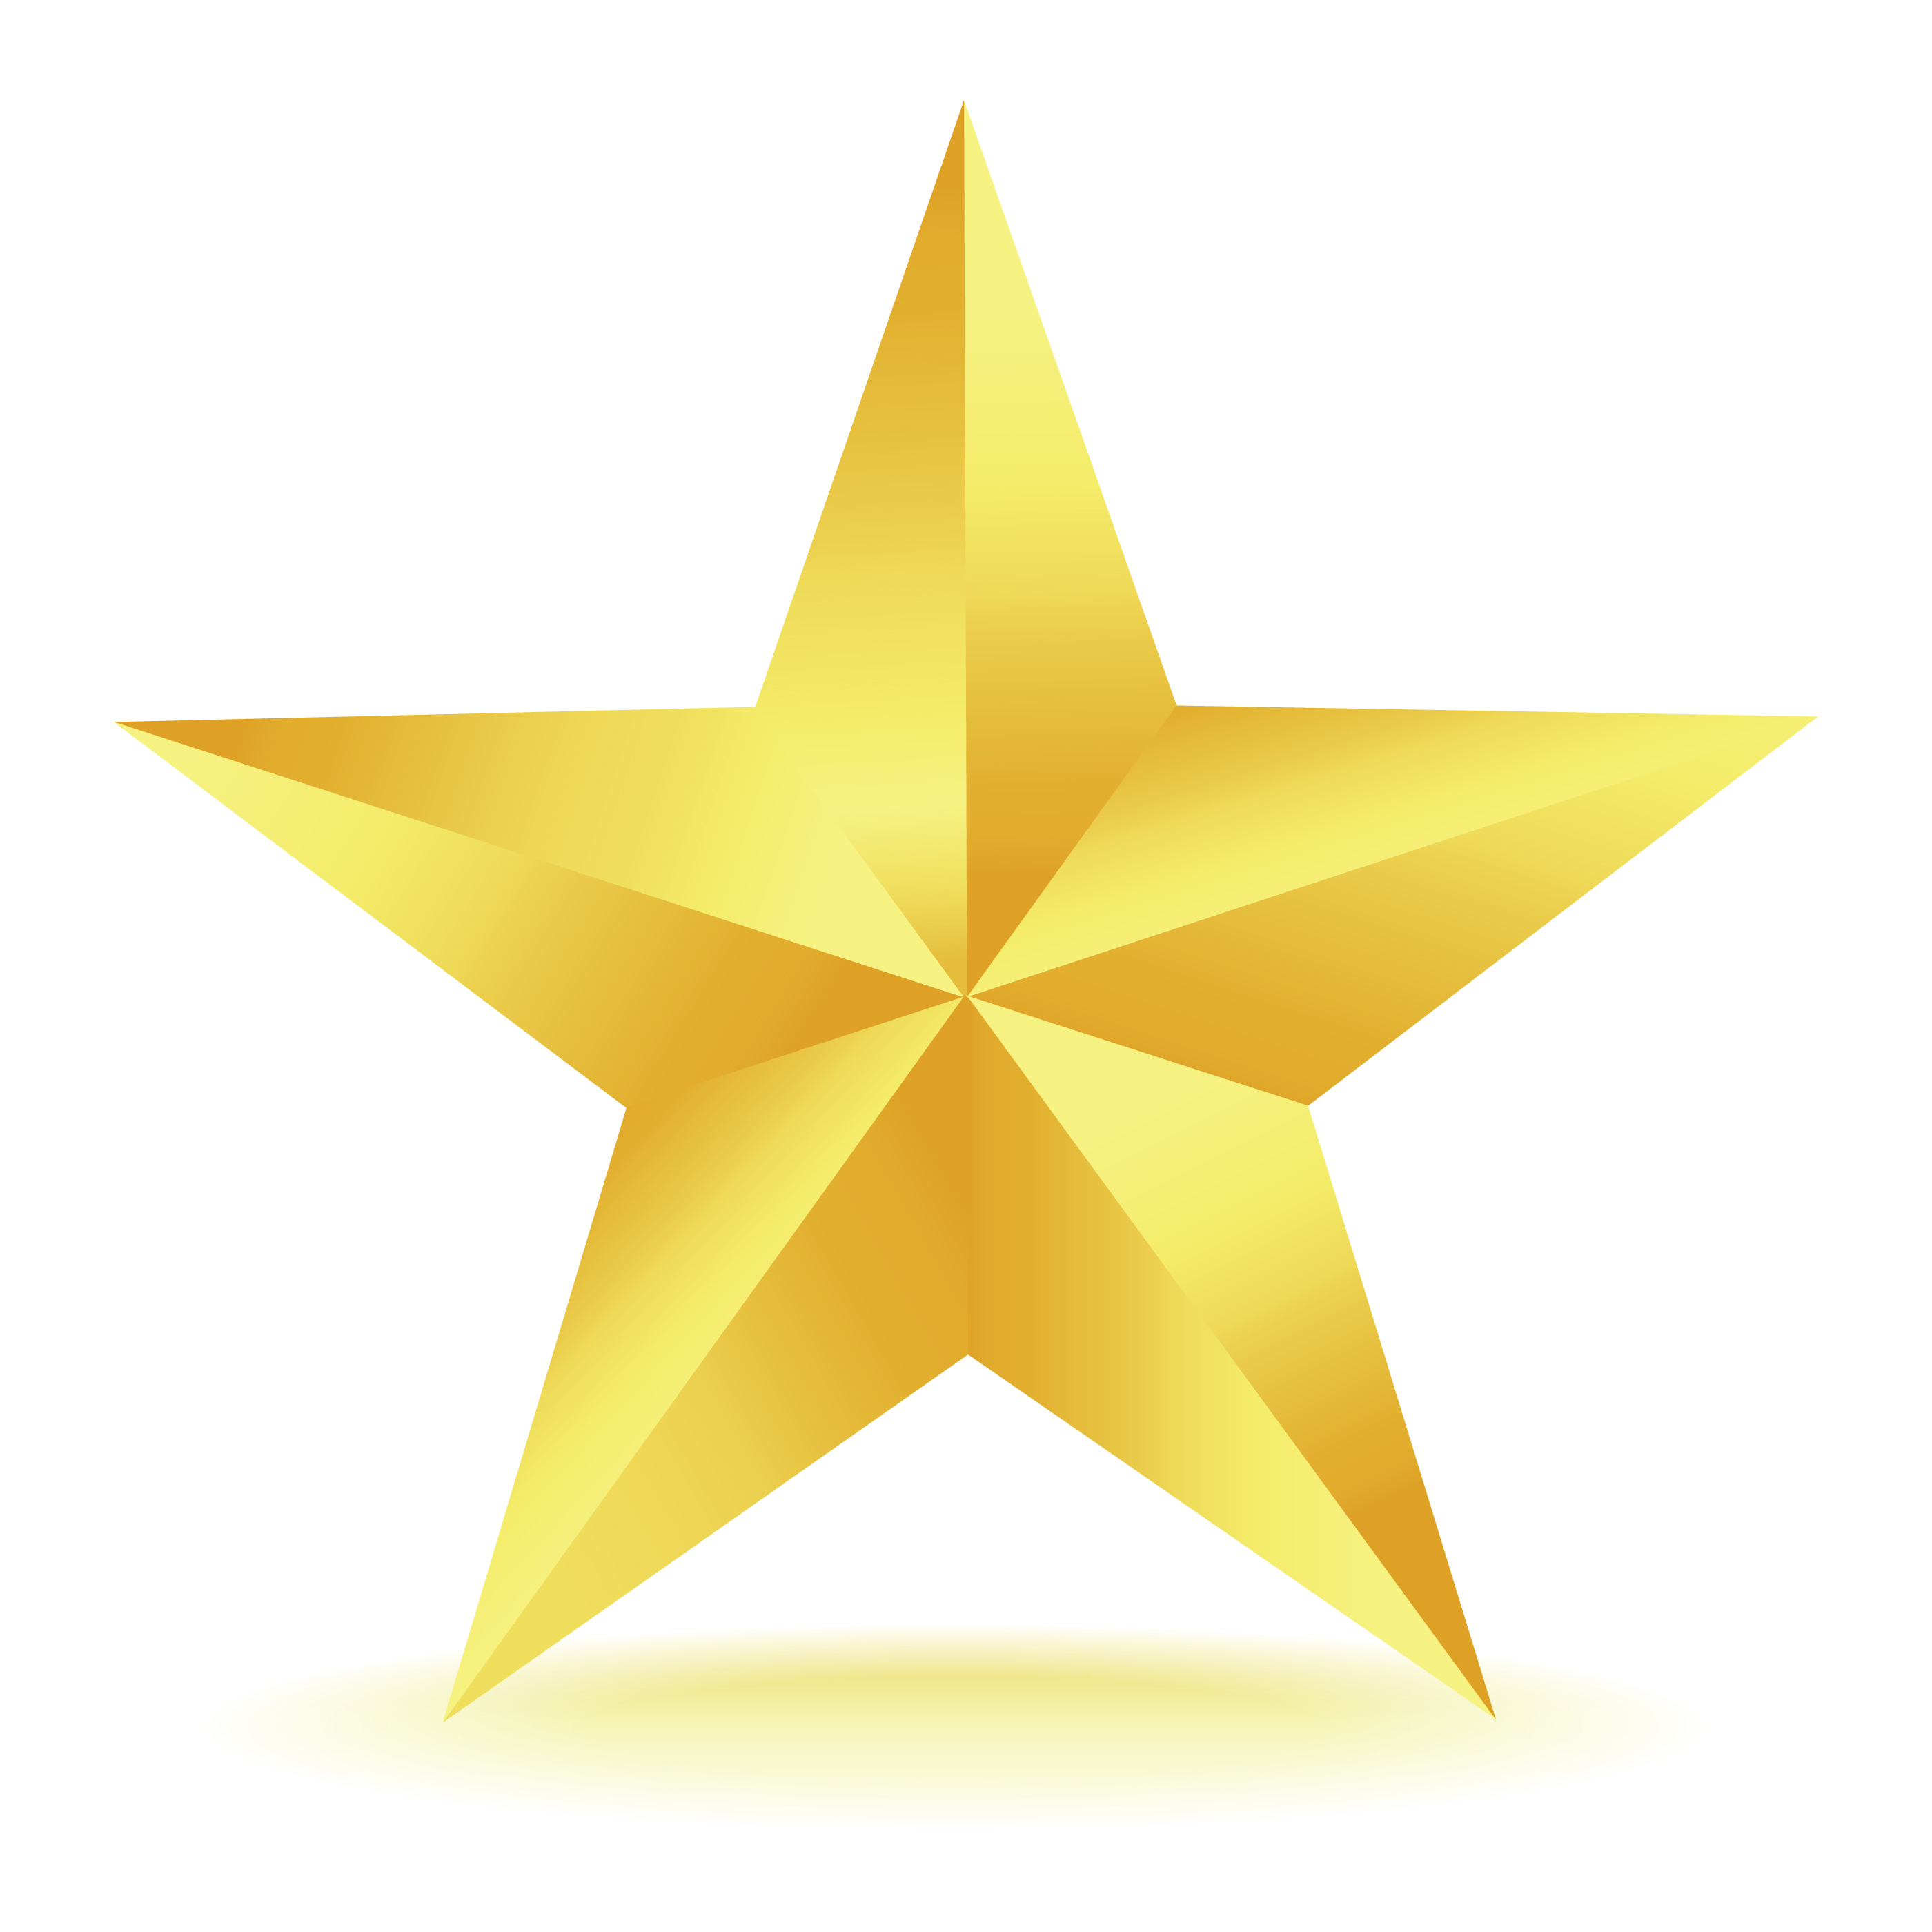 Gold Star Hd Image Clipart